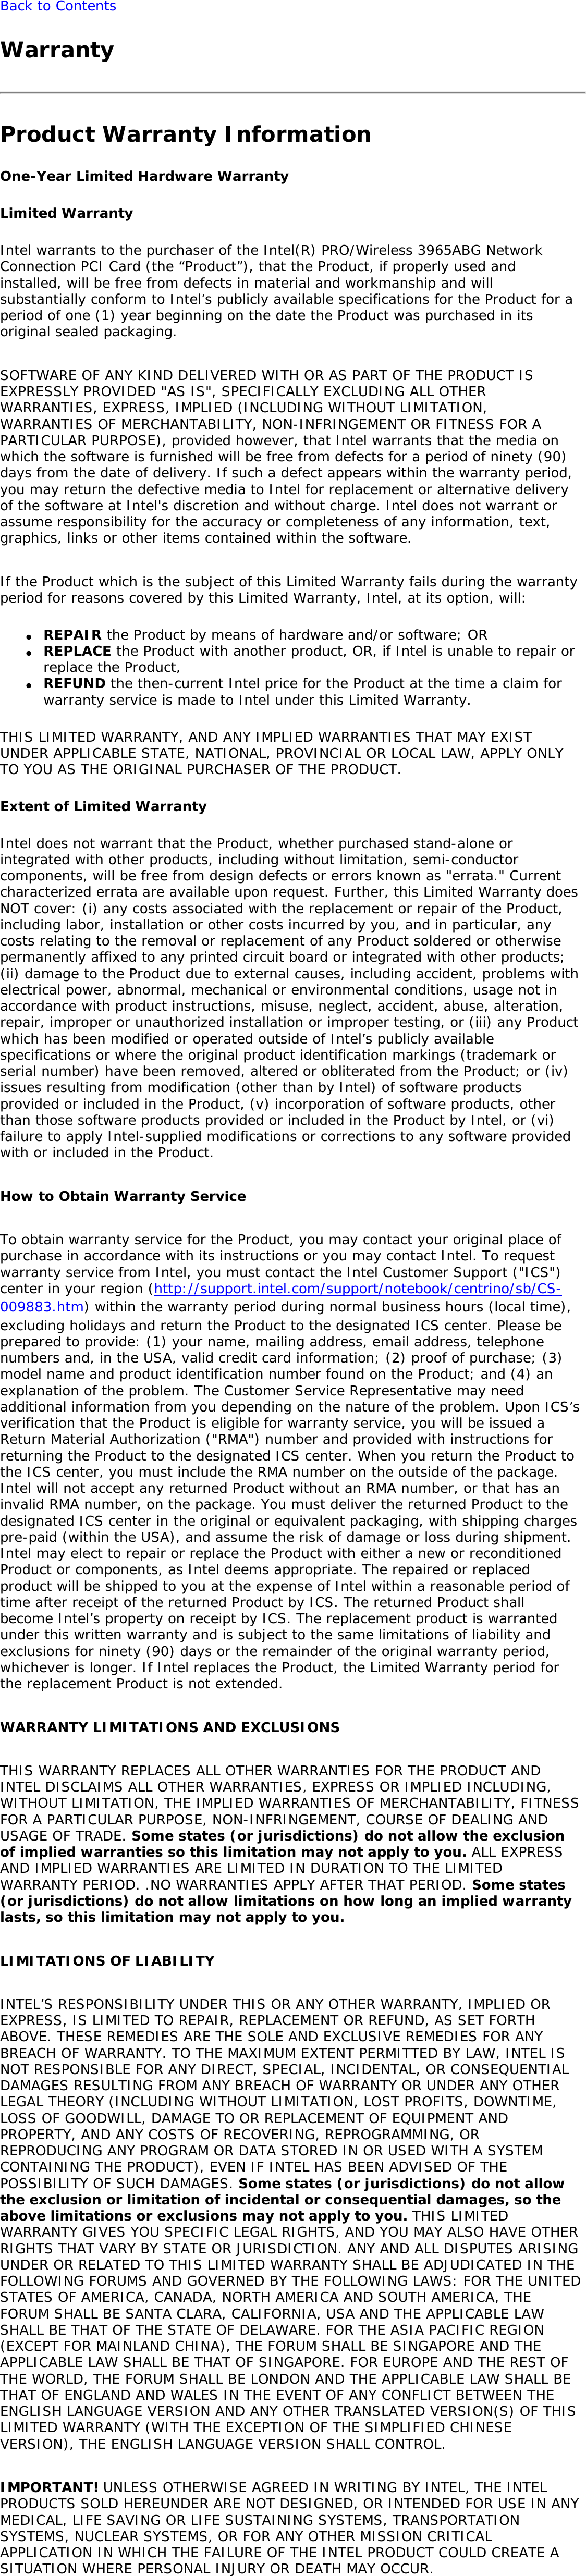 Back to Contents WarrantyProduct Warranty InformationOne-Year Limited Hardware WarrantyLimited WarrantyIntel warrants to the purchaser of the Intel(R) PRO/Wireless 3965ABG Network Connection PCI Card (the “Product”), that the Product, if properly used and installed, will be free from defects in material and workmanship and will substantially conform to Intel’s publicly available specifications for the Product for a period of one (1) year beginning on the date the Product was purchased in its original sealed packaging.   SOFTWARE OF ANY KIND DELIVERED WITH OR AS PART OF THE PRODUCT IS EXPRESSLY PROVIDED &quot;AS IS&quot;, SPECIFICALLY EXCLUDING ALL OTHER WARRANTIES, EXPRESS, IMPLIED (INCLUDING WITHOUT LIMITATION, WARRANTIES OF MERCHANTABILITY, NON-INFRINGEMENT OR FITNESS FOR A PARTICULAR PURPOSE), provided however, that Intel warrants that the media on which the software is furnished will be free from defects for a period of ninety (90) days from the date of delivery. If such a defect appears within the warranty period, you may return the defective media to Intel for replacement or alternative delivery of the software at Intel&apos;s discretion and without charge. Intel does not warrant or assume responsibility for the accuracy or completeness of any information, text, graphics, links or other items contained within the software.    If the Product which is the subject of this Limited Warranty fails during the warranty period for reasons covered by this Limited Warranty, Intel, at its option, will: ●     REPAIR the Product by means of hardware and/or software; OR●     REPLACE the Product with another product, OR, if Intel is unable to repair or replace the Product, ●     REFUND the then-current Intel price for the Product at the time a claim for warranty service is made to Intel under this Limited Warranty.THIS LIMITED WARRANTY, AND ANY IMPLIED WARRANTIES THAT MAY EXIST UNDER APPLICABLE STATE, NATIONAL, PROVINCIAL OR LOCAL LAW, APPLY ONLY TO YOU AS THE ORIGINAL PURCHASER OF THE PRODUCT. Extent of Limited WarrantyIntel does not warrant that the Product, whether purchased stand-alone or integrated with other products, including without limitation, semi-conductor components, will be free from design defects or errors known as &quot;errata.&quot; Current characterized errata are available upon request. Further, this Limited Warranty does NOT cover: (i) any costs associated with the replacement or repair of the Product, including labor, installation or other costs incurred by you, and in particular, any costs relating to the removal or replacement of any Product soldered or otherwise permanently affixed to any printed circuit board or integrated with other products; (ii) damage to the Product due to external causes, including accident, problems with electrical power, abnormal, mechanical or environmental conditions, usage not in accordance with product instructions, misuse, neglect, accident, abuse, alteration, repair, improper or unauthorized installation or improper testing, or (iii) any Product which has been modified or operated outside of Intel’s publicly available specifications or where the original product identification markings (trademark or serial number) have been removed, altered or obliterated from the Product; or (iv) issues resulting from modification (other than by Intel) of software products provided or included in the Product, (v) incorporation of software products, other than those software products provided or included in the Product by Intel, or (vi) failure to apply Intel-supplied modifications or corrections to any software provided with or included in the Product.   How to Obtain Warranty Service    To obtain warranty service for the Product, you may contact your original place of purchase in accordance with its instructions or you may contact Intel. To request warranty service from Intel, you must contact the Intel Customer Support (&quot;ICS&quot;) center in your region (http://support.intel.com/support/notebook/centrino/sb/CS-009883.htm) within the warranty period during normal business hours (local time), excluding holidays and return the Product to the designated ICS center. Please be prepared to provide: (1) your name, mailing address, email address, telephone numbers and, in the USA, valid credit card information; (2) proof of purchase; (3) model name and product identification number found on the Product; and (4) an explanation of the problem. The Customer Service Representative may need additional information from you depending on the nature of the problem. Upon ICS’s verification that the Product is eligible for warranty service, you will be issued a Return Material Authorization (&quot;RMA&quot;) number and provided with instructions for returning the Product to the designated ICS center. When you return the Product to the ICS center, you must include the RMA number on the outside of the package. Intel will not accept any returned Product without an RMA number, or that has an invalid RMA number, on the package. You must deliver the returned Product to the designated ICS center in the original or equivalent packaging, with shipping charges pre-paid (within the USA), and assume the risk of damage or loss during shipment. Intel may elect to repair or replace the Product with either a new or reconditioned Product or components, as Intel deems appropriate. The repaired or replaced product will be shipped to you at the expense of Intel within a reasonable period of time after receipt of the returned Product by ICS. The returned Product shall become Intel’s property on receipt by ICS. The replacement product is warranted under this written warranty and is subject to the same limitations of liability and exclusions for ninety (90) days or the remainder of the original warranty period, whichever is longer. If Intel replaces the Product, the Limited Warranty period for the replacement Product is not extended.   WARRANTY LIMITATIONS AND EXCLUSIONS   THIS WARRANTY REPLACES ALL OTHER WARRANTIES FOR THE PRODUCT AND INTEL DISCLAIMS ALL OTHER WARRANTIES, EXPRESS OR IMPLIED INCLUDING, WITHOUT LIMITATION, THE IMPLIED WARRANTIES OF MERCHANTABILITY, FITNESS FOR A PARTICULAR PURPOSE, NON-INFRINGEMENT, COURSE OF DEALING AND USAGE OF TRADE. Some states (or jurisdictions) do not allow the exclusion of implied warranties so this limitation may not apply to you. ALL EXPRESS AND IMPLIED WARRANTIES ARE LIMITED IN DURATION TO THE LIMITED WARRANTY PERIOD. .NO WARRANTIES APPLY AFTER THAT PERIOD. Some states (or jurisdictions) do not allow limitations on how long an implied warranty lasts, so this limitation may not apply to you.   LIMITATIONS OF LIABILITY   INTEL’S RESPONSIBILITY UNDER THIS OR ANY OTHER WARRANTY, IMPLIED OR EXPRESS, IS LIMITED TO REPAIR, REPLACEMENT OR REFUND, AS SET FORTH ABOVE. THESE REMEDIES ARE THE SOLE AND EXCLUSIVE REMEDIES FOR ANY BREACH OF WARRANTY. TO THE MAXIMUM EXTENT PERMITTED BY LAW, INTEL IS NOT RESPONSIBLE FOR ANY DIRECT, SPECIAL, INCIDENTAL, OR CONSEQUENTIAL DAMAGES RESULTING FROM ANY BREACH OF WARRANTY OR UNDER ANY OTHER LEGAL THEORY (INCLUDING WITHOUT LIMITATION, LOST PROFITS, DOWNTIME, LOSS OF GOODWILL, DAMAGE TO OR REPLACEMENT OF EQUIPMENT AND PROPERTY, AND ANY COSTS OF RECOVERING, REPROGRAMMING, OR REPRODUCING ANY PROGRAM OR DATA STORED IN OR USED WITH A SYSTEM CONTAINING THE PRODUCT), EVEN IF INTEL HAS BEEN ADVISED OF THE POSSIBILITY OF SUCH DAMAGES. Some states (or jurisdictions) do not allow the exclusion or limitation of incidental or consequential damages, so the above limitations or exclusions may not apply to you. THIS LIMITED WARRANTY GIVES YOU SPECIFIC LEGAL RIGHTS, AND YOU MAY ALSO HAVE OTHER RIGHTS THAT VARY BY STATE OR JURISDICTION. ANY AND ALL DISPUTES ARISING UNDER OR RELATED TO THIS LIMITED WARRANTY SHALL BE ADJUDICATED IN THE FOLLOWING FORUMS AND GOVERNED BY THE FOLLOWING LAWS: FOR THE UNITED STATES OF AMERICA, CANADA, NORTH AMERICA AND SOUTH AMERICA, THE FORUM SHALL BE SANTA CLARA, CALIFORNIA, USA AND THE APPLICABLE LAW SHALL BE THAT OF THE STATE OF DELAWARE. FOR THE ASIA PACIFIC REGION (EXCEPT FOR MAINLAND CHINA), THE FORUM SHALL BE SINGAPORE AND THE APPLICABLE LAW SHALL BE THAT OF SINGAPORE. FOR EUROPE AND THE REST OF THE WORLD, THE FORUM SHALL BE LONDON AND THE APPLICABLE LAW SHALL BE THAT OF ENGLAND AND WALES IN THE EVENT OF ANY CONFLICT BETWEEN THE ENGLISH LANGUAGE VERSION AND ANY OTHER TRANSLATED VERSION(S) OF THIS LIMITED WARRANTY (WITH THE EXCEPTION OF THE SIMPLIFIED CHINESE VERSION), THE ENGLISH LANGUAGE VERSION SHALL CONTROL.   IMPORTANT! UNLESS OTHERWISE AGREED IN WRITING BY INTEL, THE INTEL PRODUCTS SOLD HEREUNDER ARE NOT DESIGNED, OR INTENDED FOR USE IN ANY MEDICAL, LIFE SAVING OR LIFE SUSTAINING SYSTEMS, TRANSPORTATION SYSTEMS, NUCLEAR SYSTEMS, OR FOR ANY OTHER MISSION CRITICAL APPLICATION IN WHICH THE FAILURE OF THE INTEL PRODUCT COULD CREATE A SITUATION WHERE PERSONAL INJURY OR DEATH MAY OCCUR.  